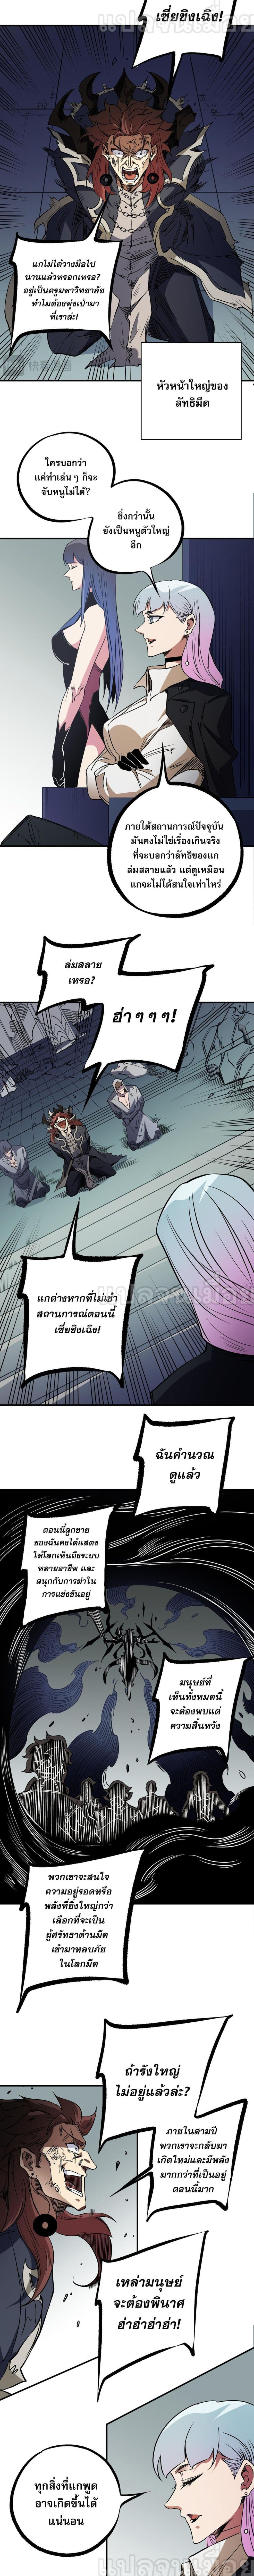 Job Changing for the Entire Population: The Jobless Me Will Terminate the Gods ฉันคือผู้เล่นไร้อาชีพที่สังหารเหล่าเทพ 75-75